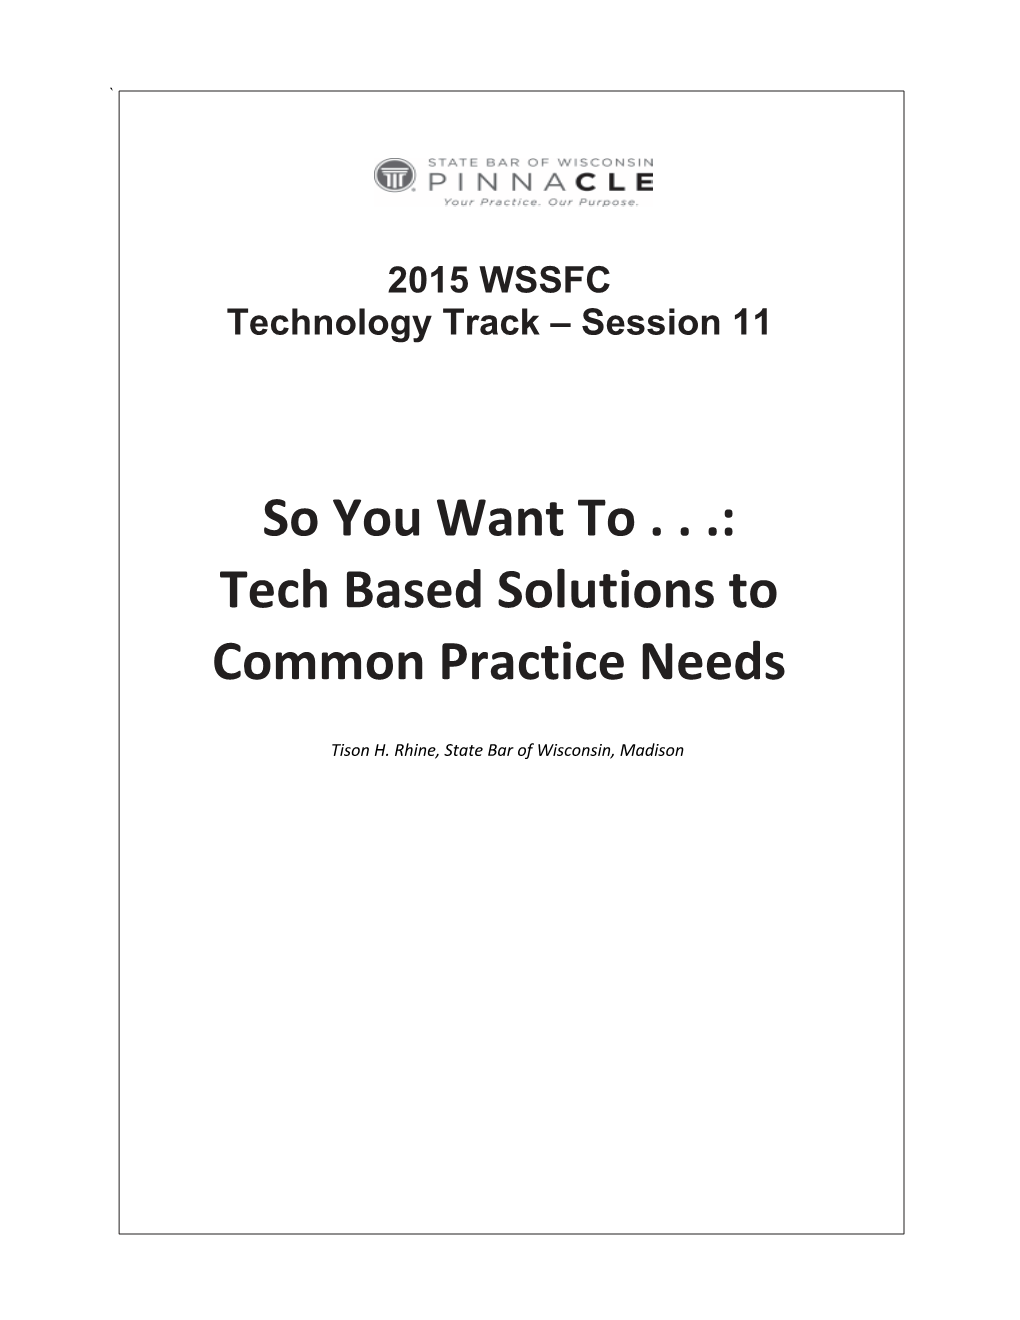 Tech Based Solutions to Common Practice Needs